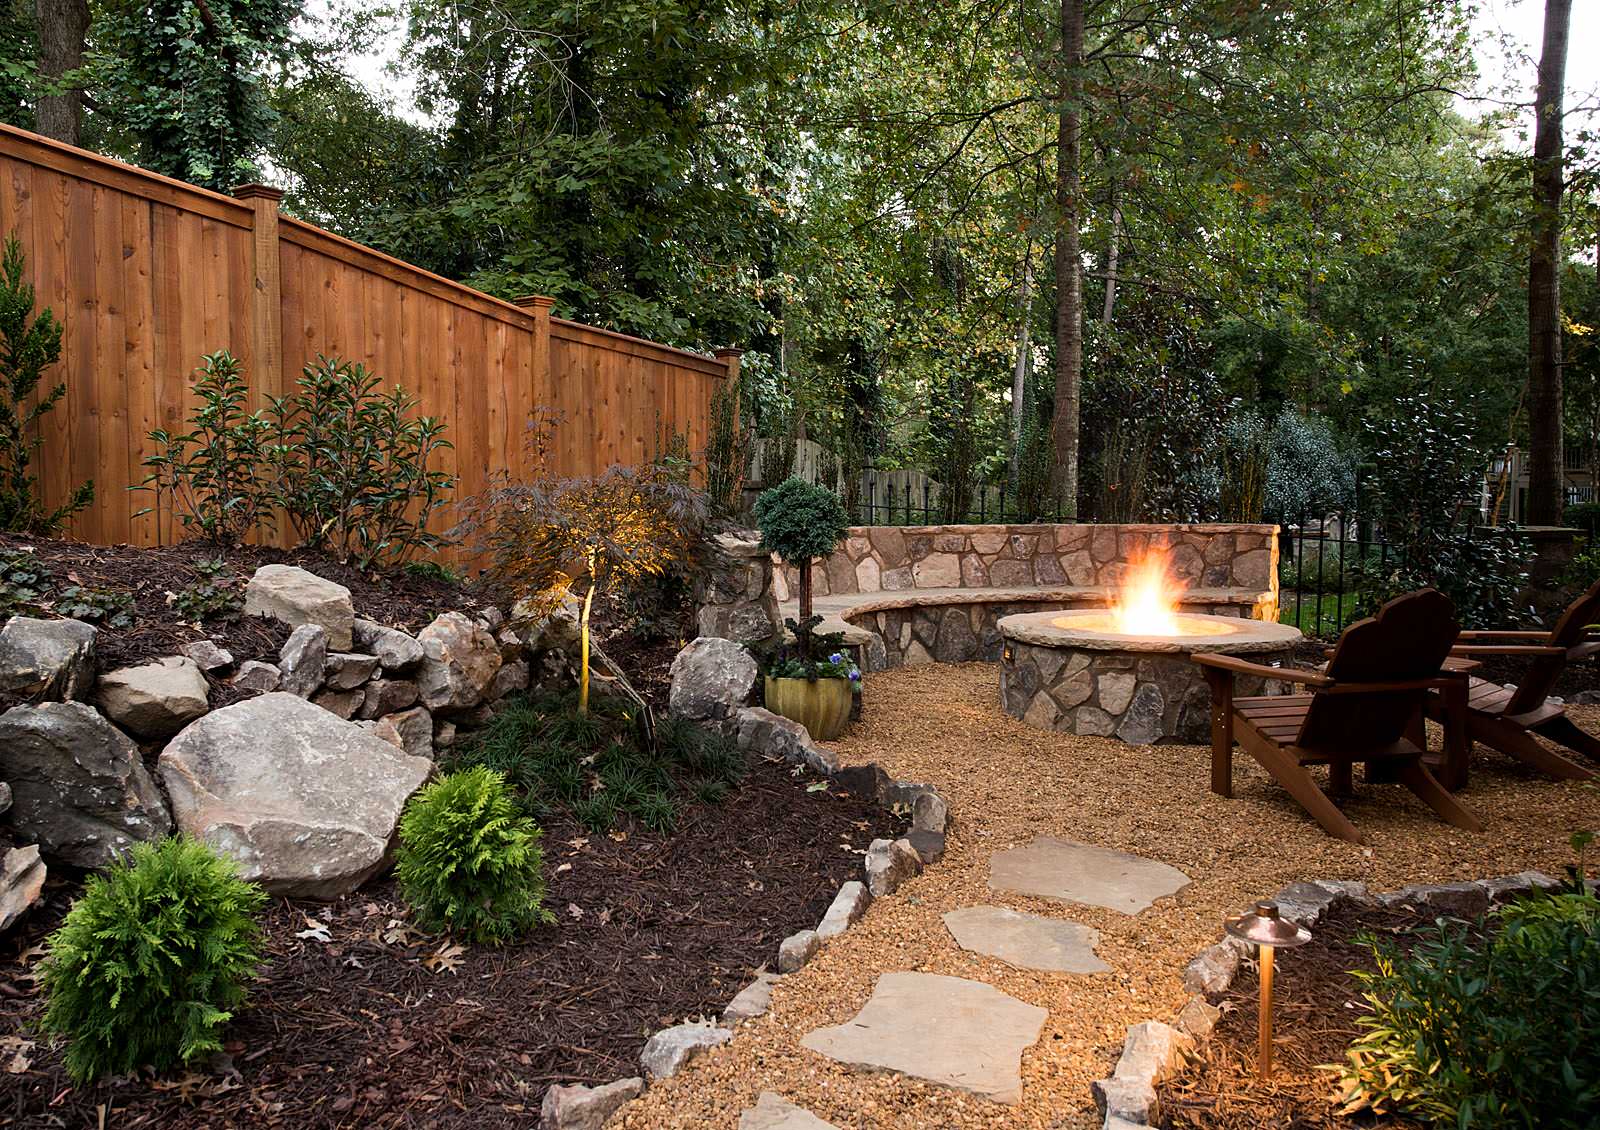 Rustic Landscaping With A Fire Pit, Landscaping Around Fire Pit